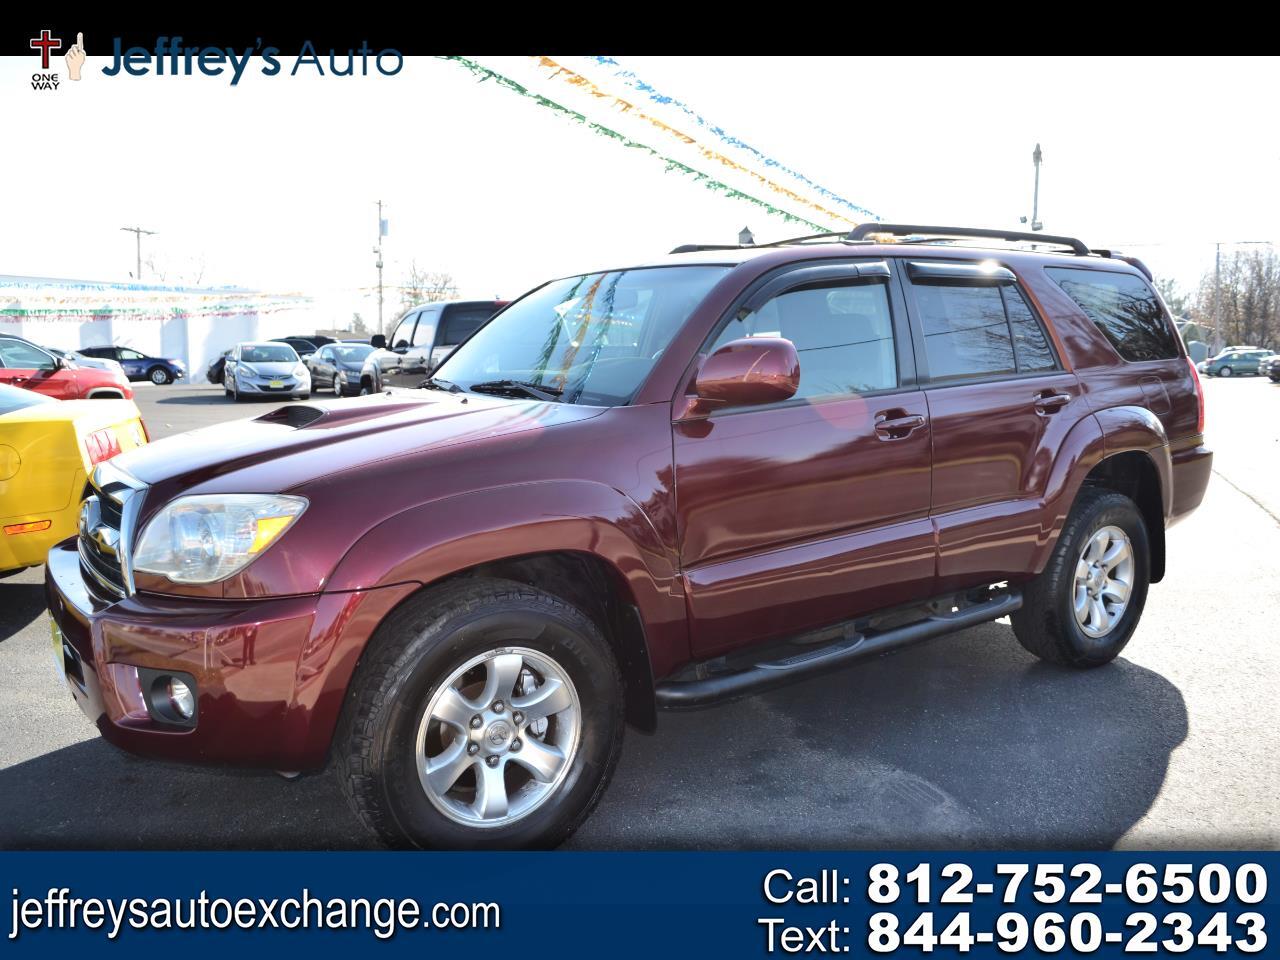 Used Cars for Sale Scottsburg IN 47170 Jeffrey's Auto Exchange